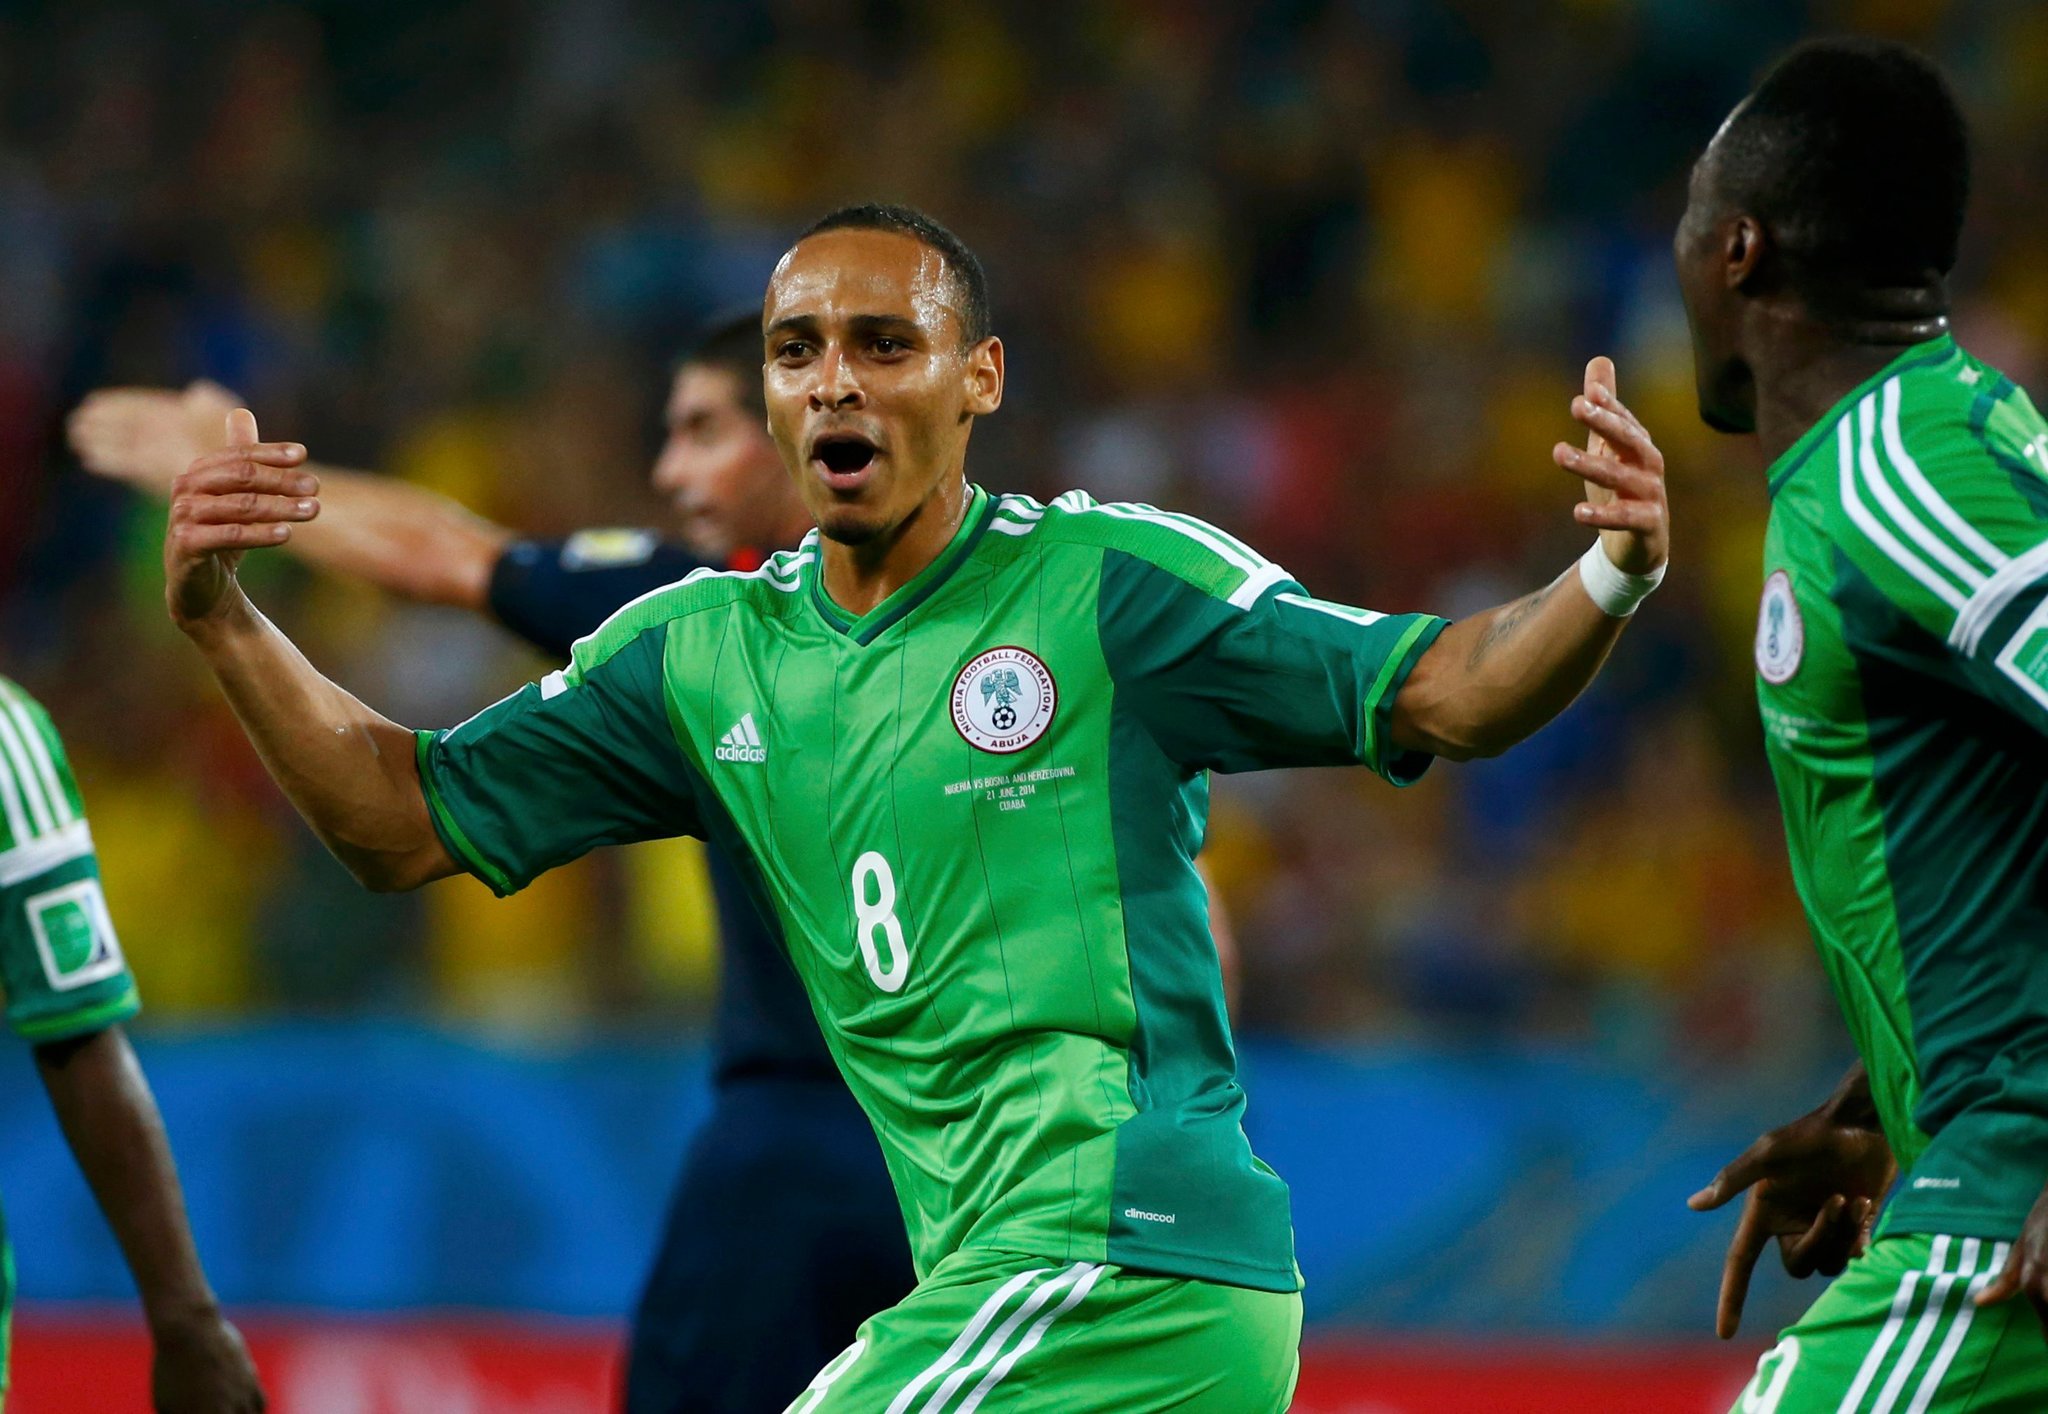 Game On DANO Network Unveils Free Soccer Streaming for Nigerian Fans